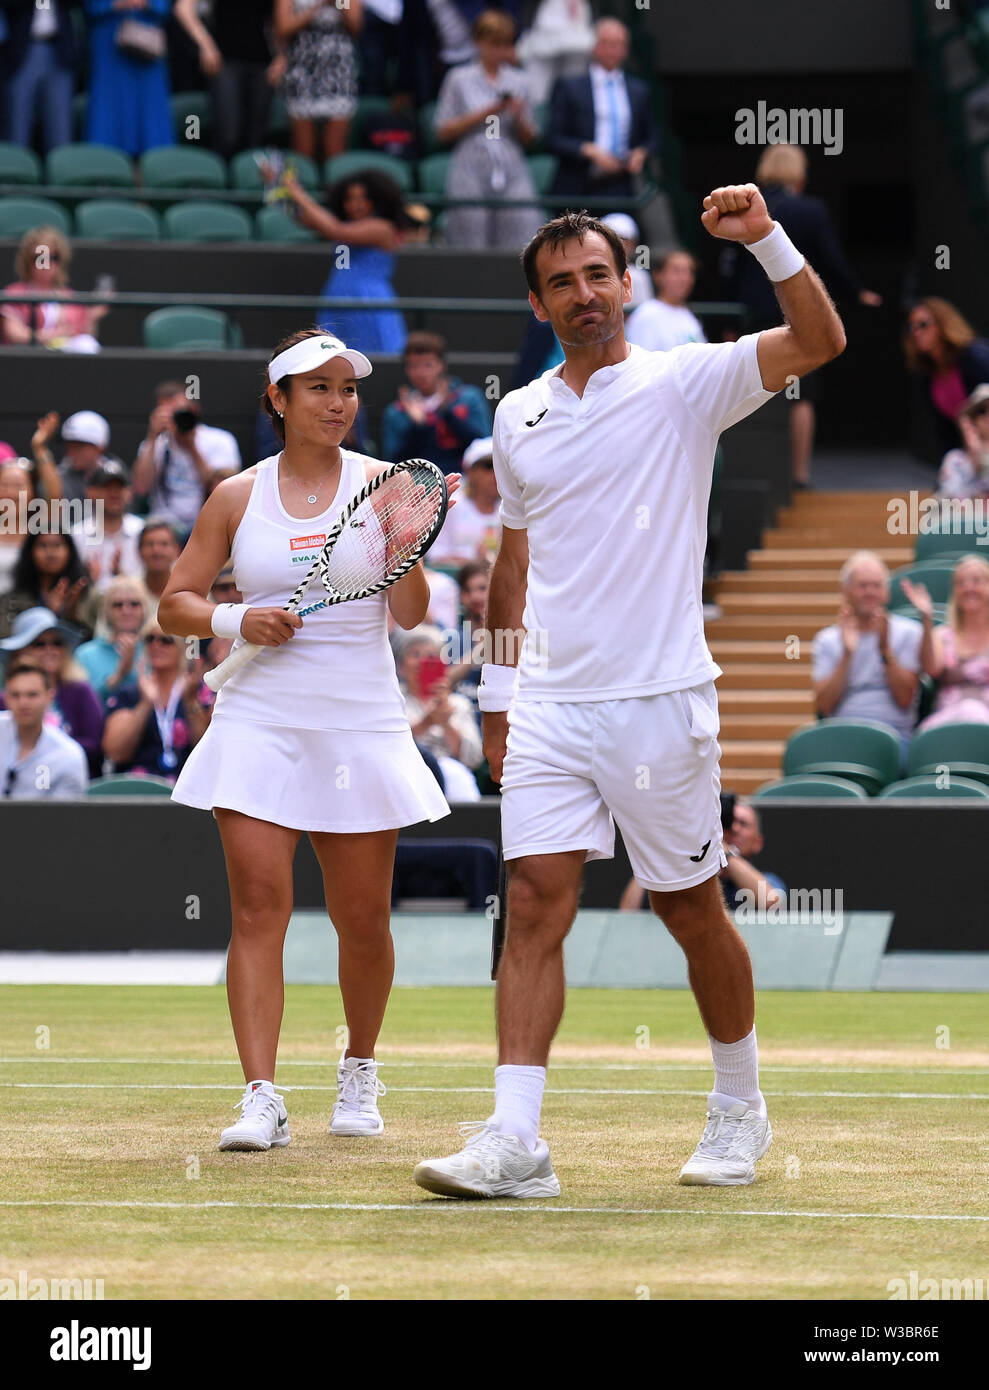 London, UK. 14th July, 2019. Ivan Dodig (R) of Croatia and Latisha Chan of  Chinese Taipei celebrate after winning the mixed doubles final match  against Robert Lindstedt of Sweden and Jelena Ostapenko